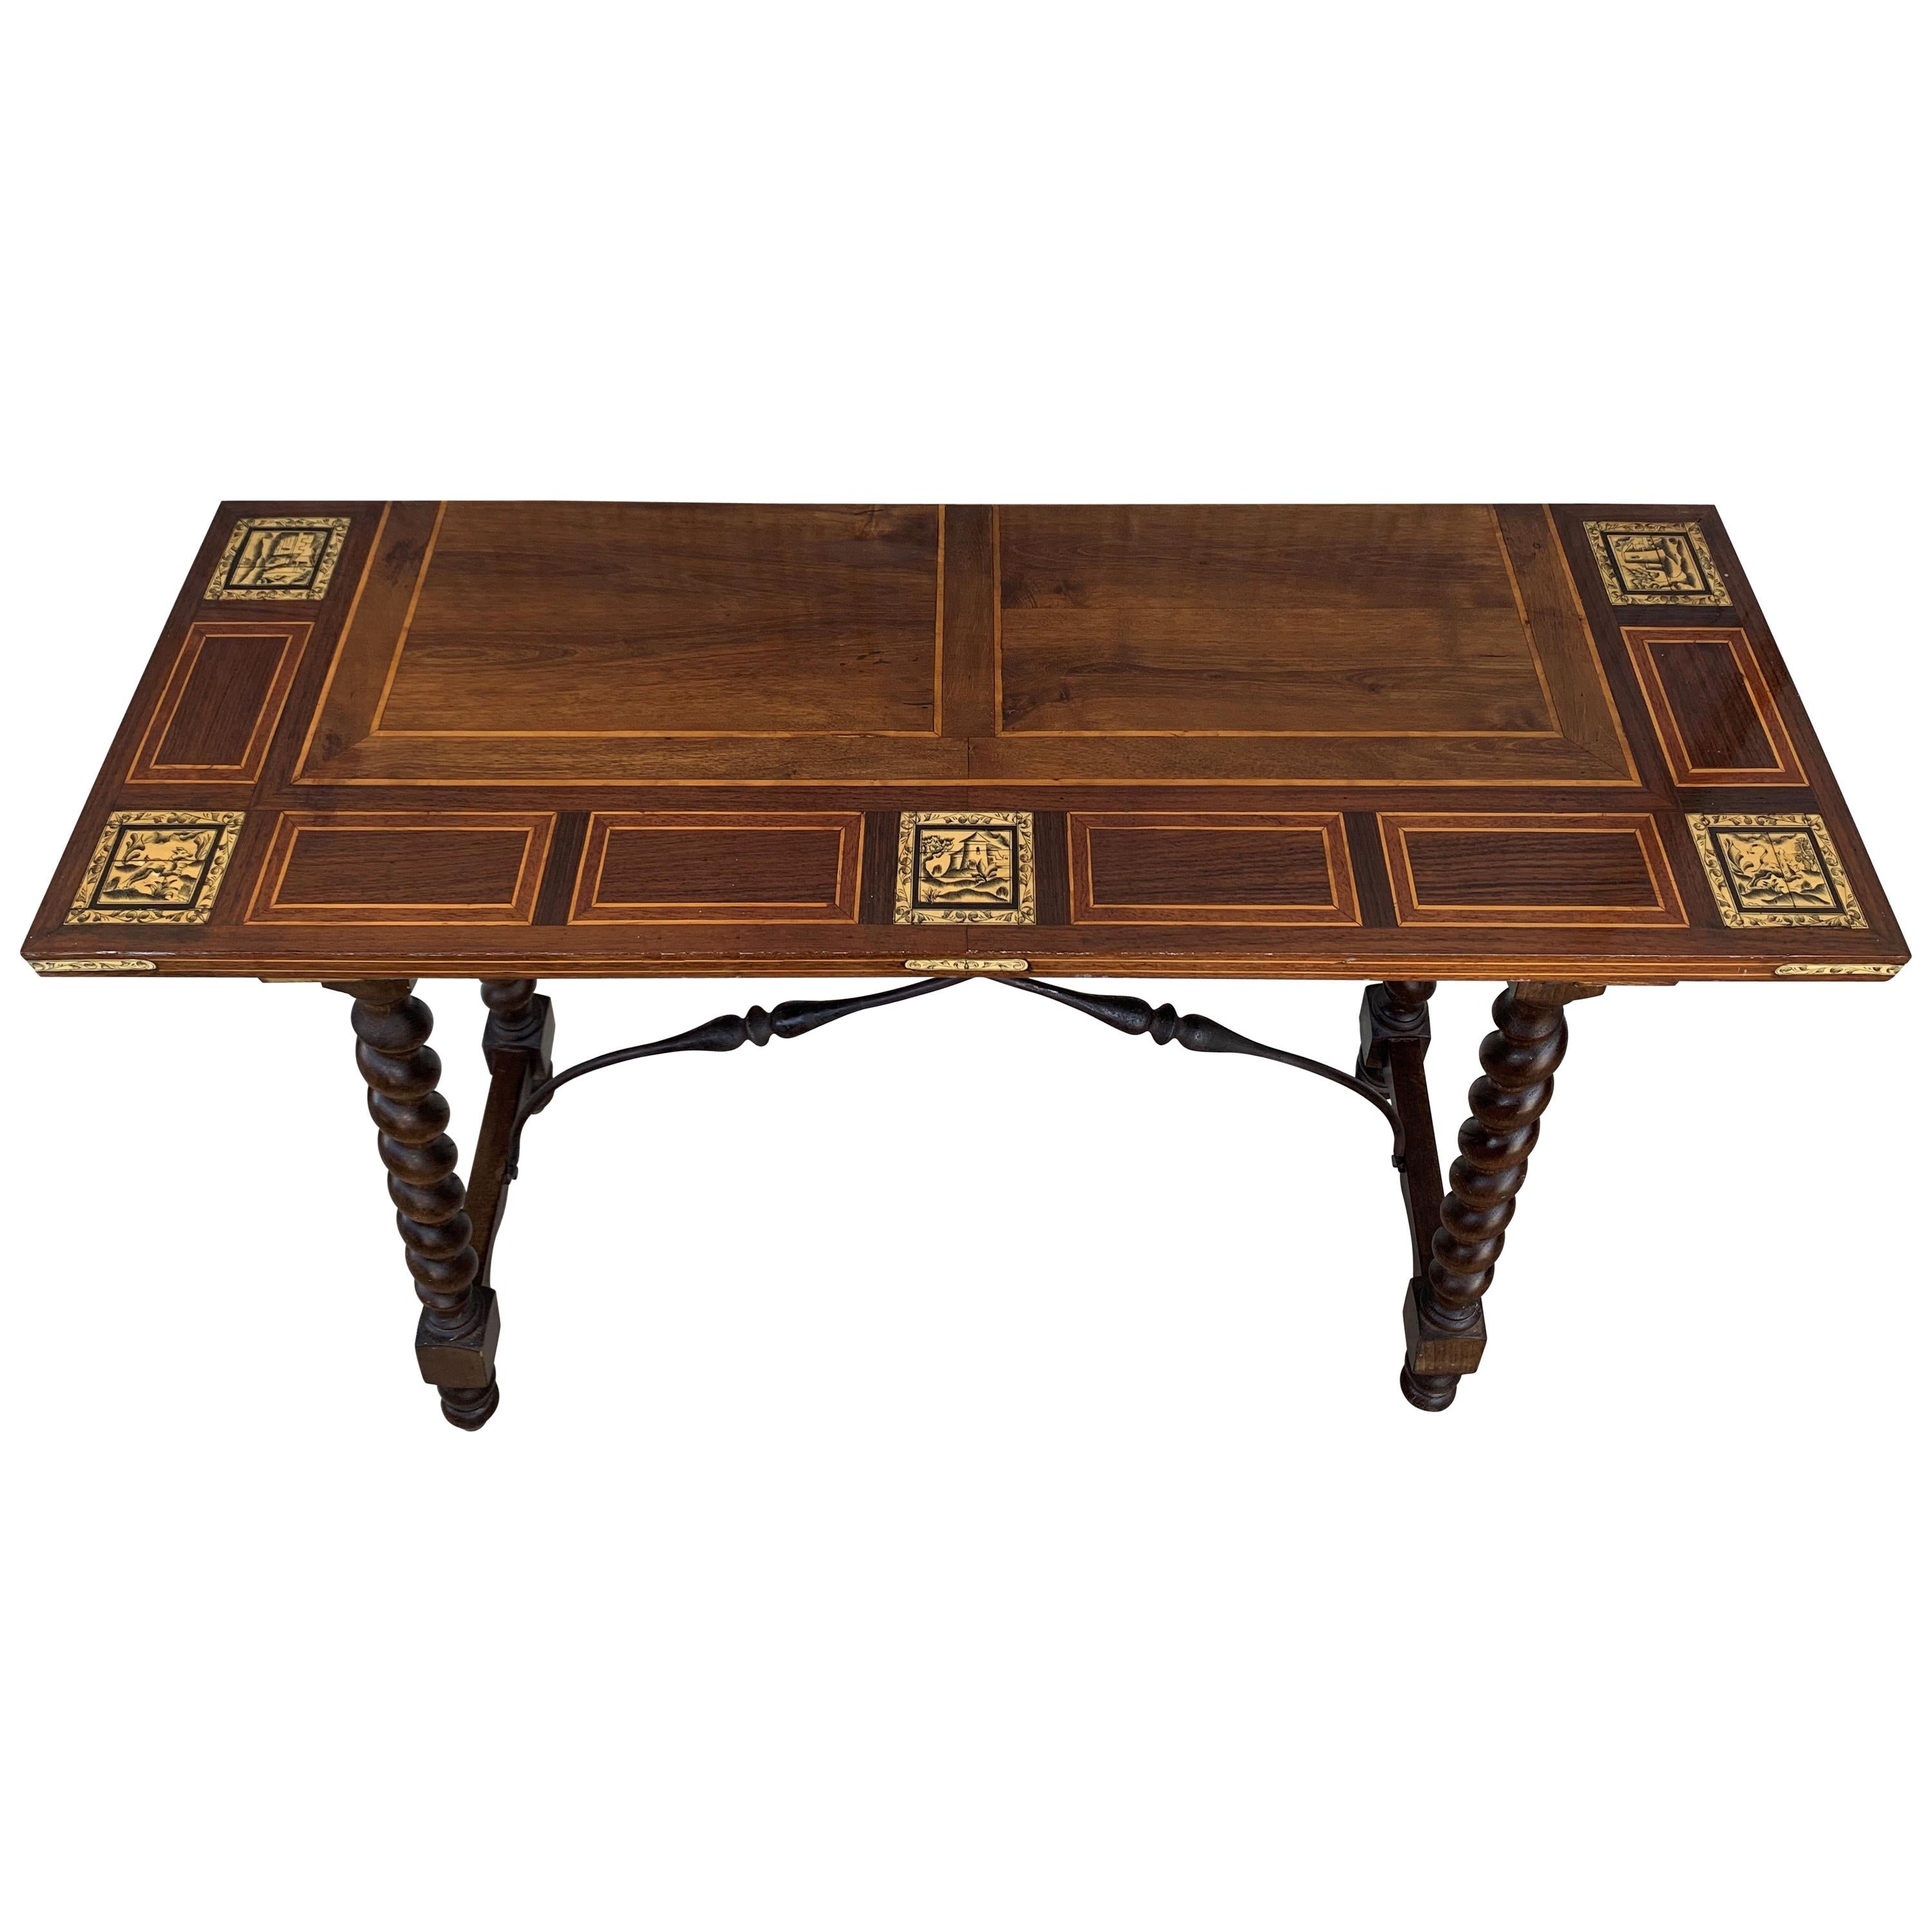 19th Century Salomonic Baroque Side Table with Inlays, Marquetry  & Stretchers